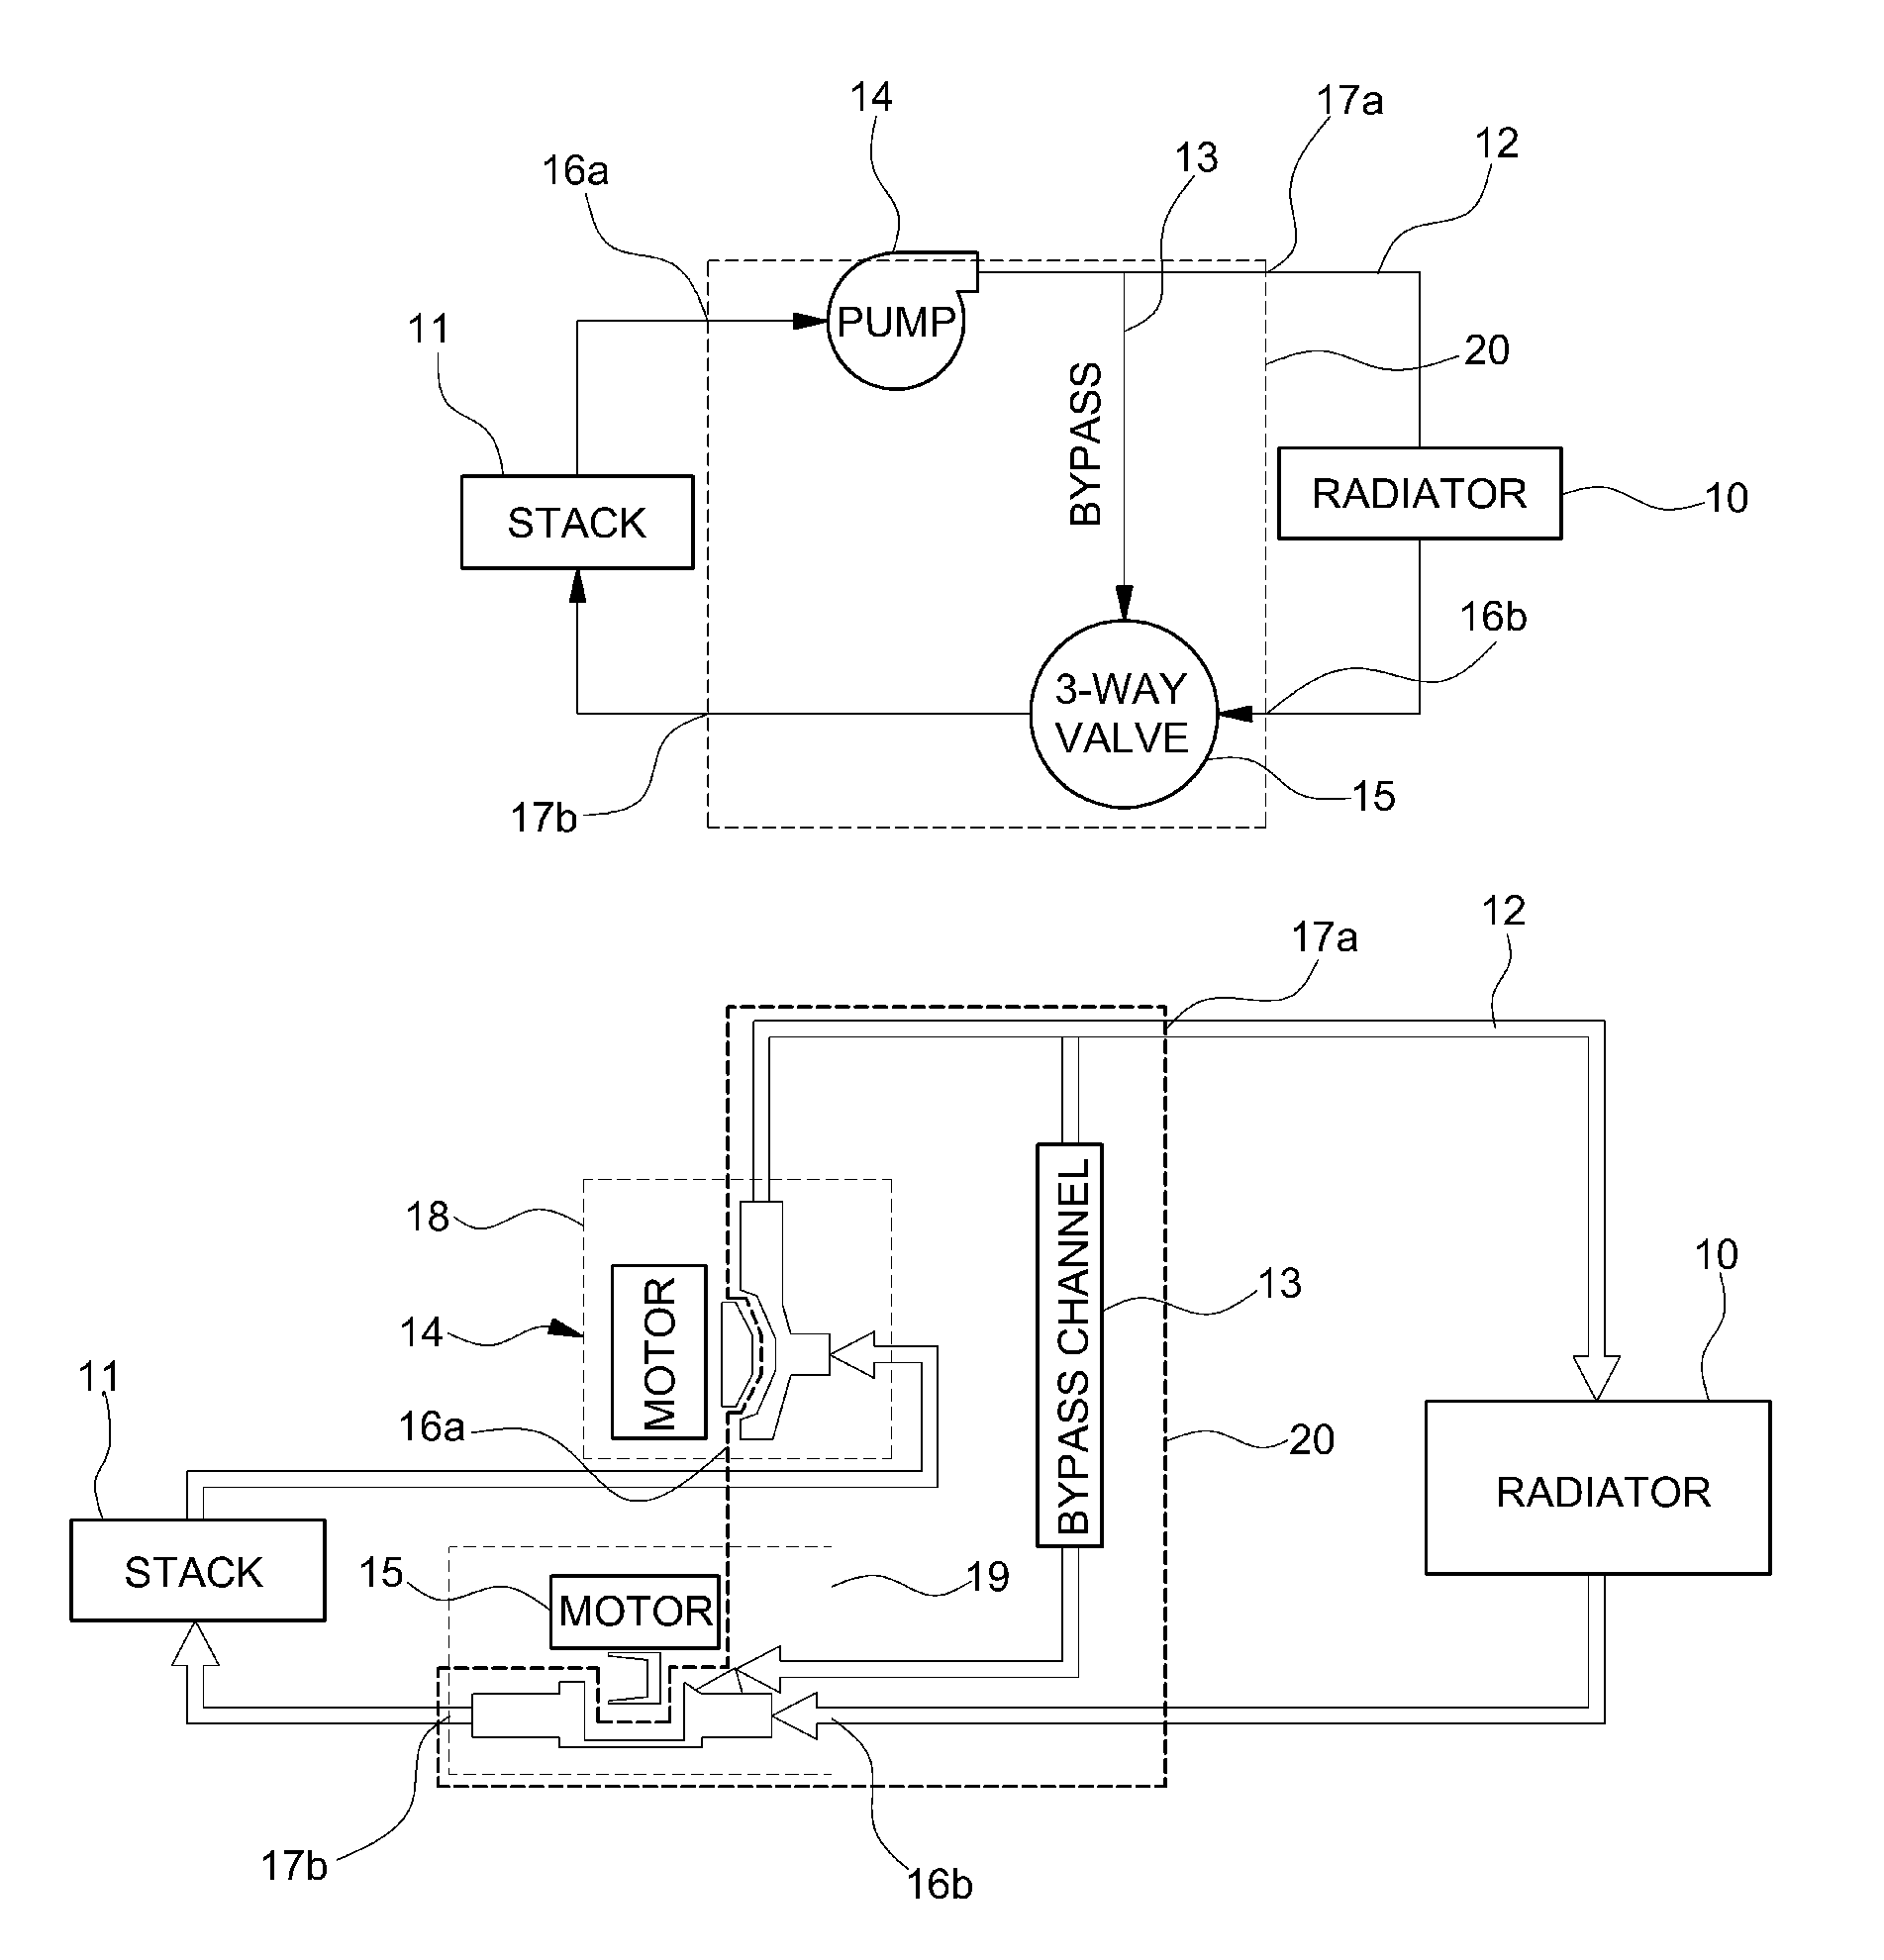 Thermal management system for fuel cell vehicles